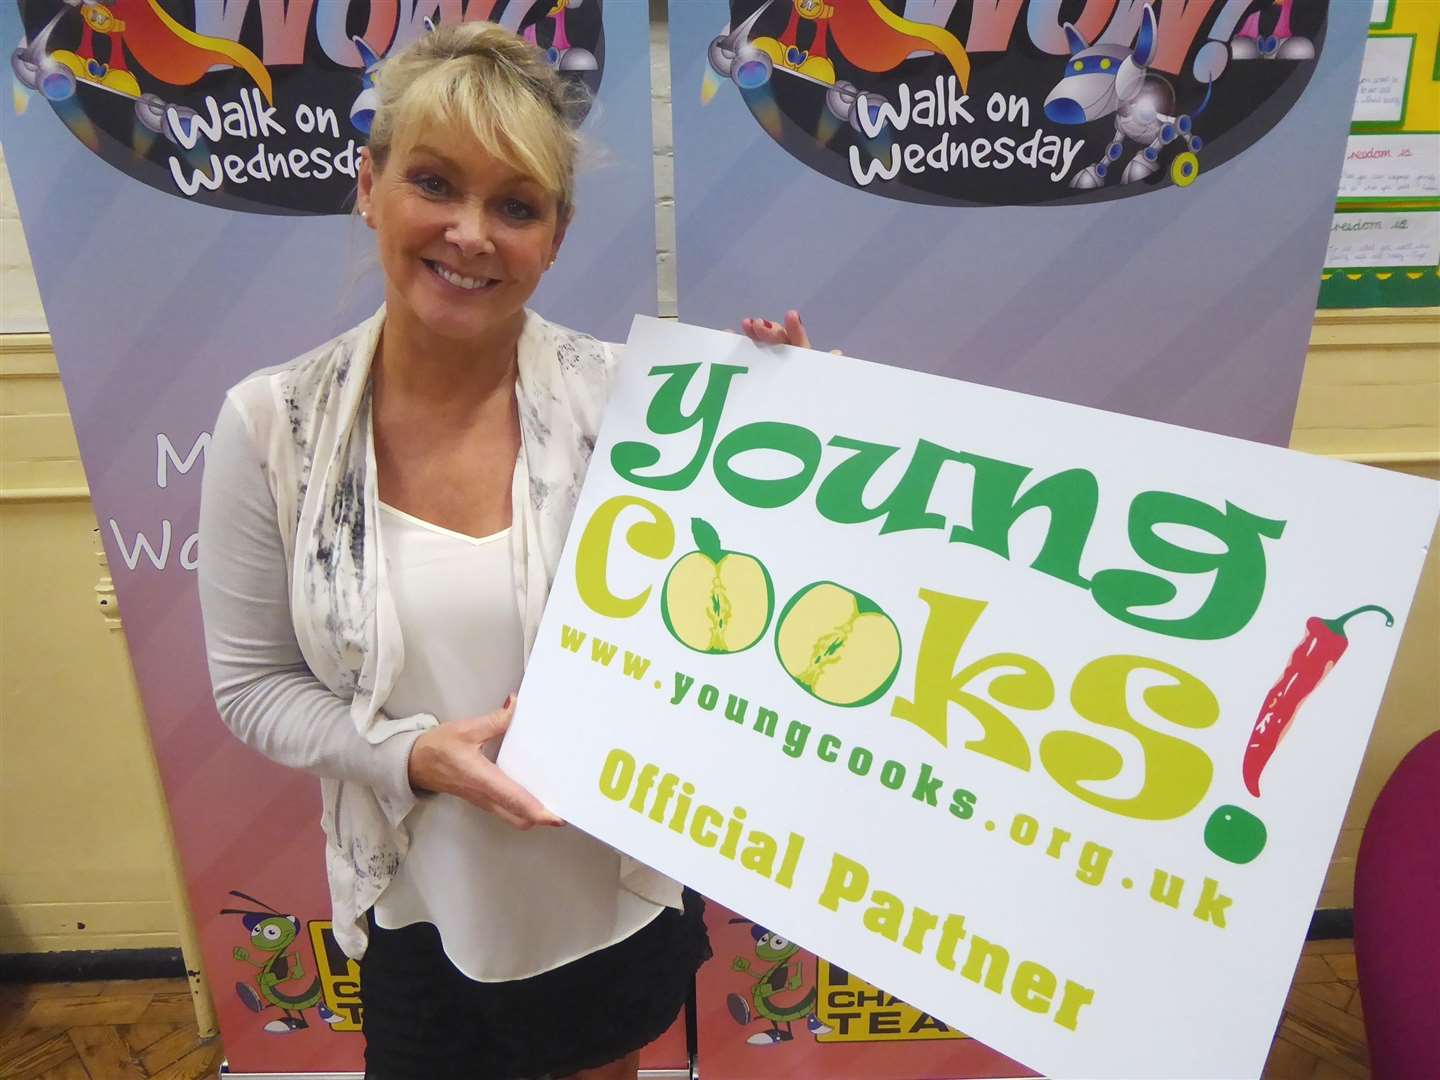 Singer and presenter Cheryl Baker supports Young Cooks.